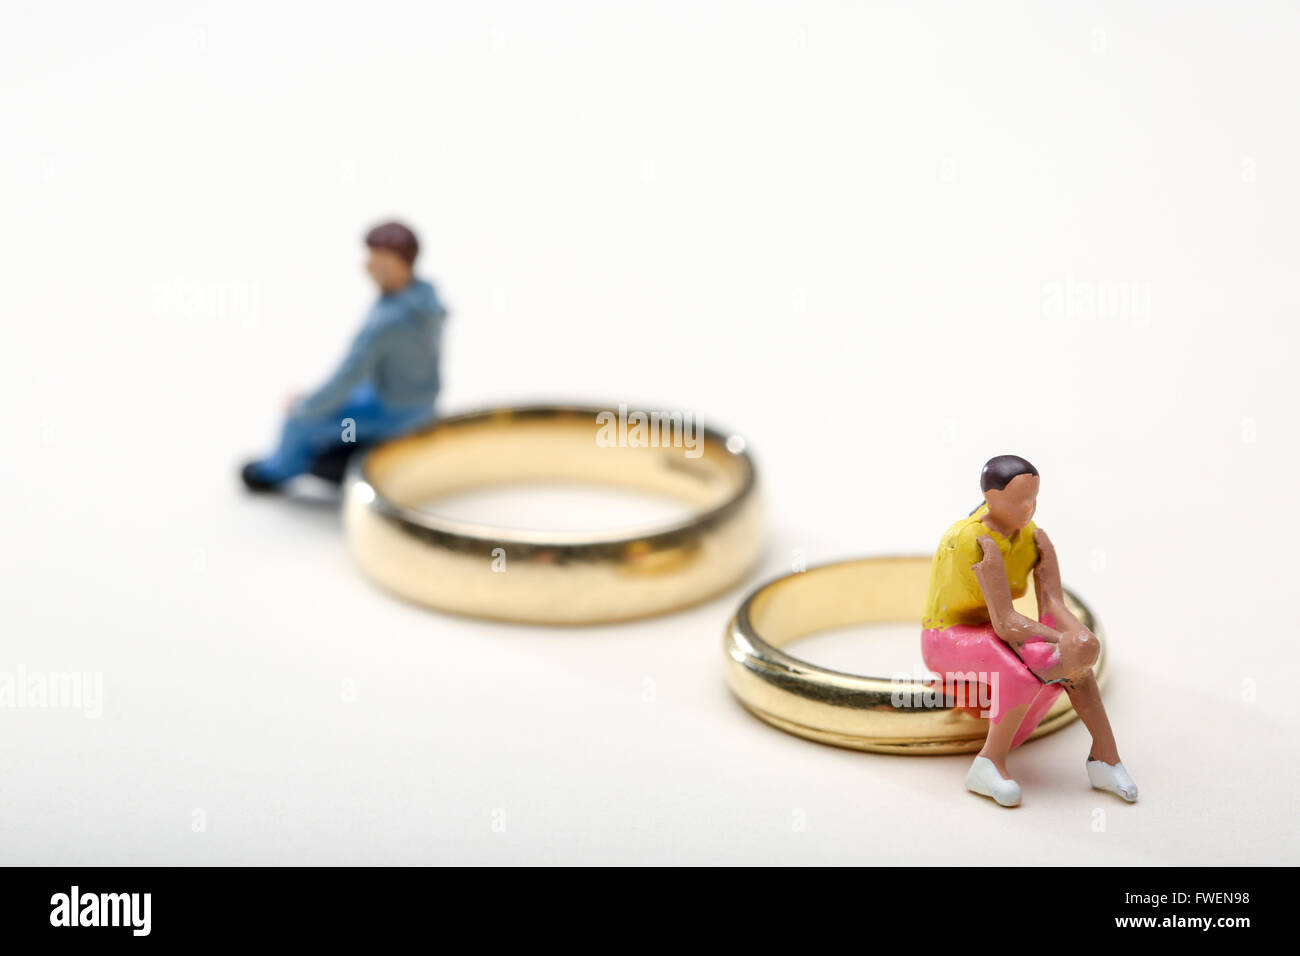 Concept image of a couple sat on wedding rings to illustrate divorce and separation Stock Photo